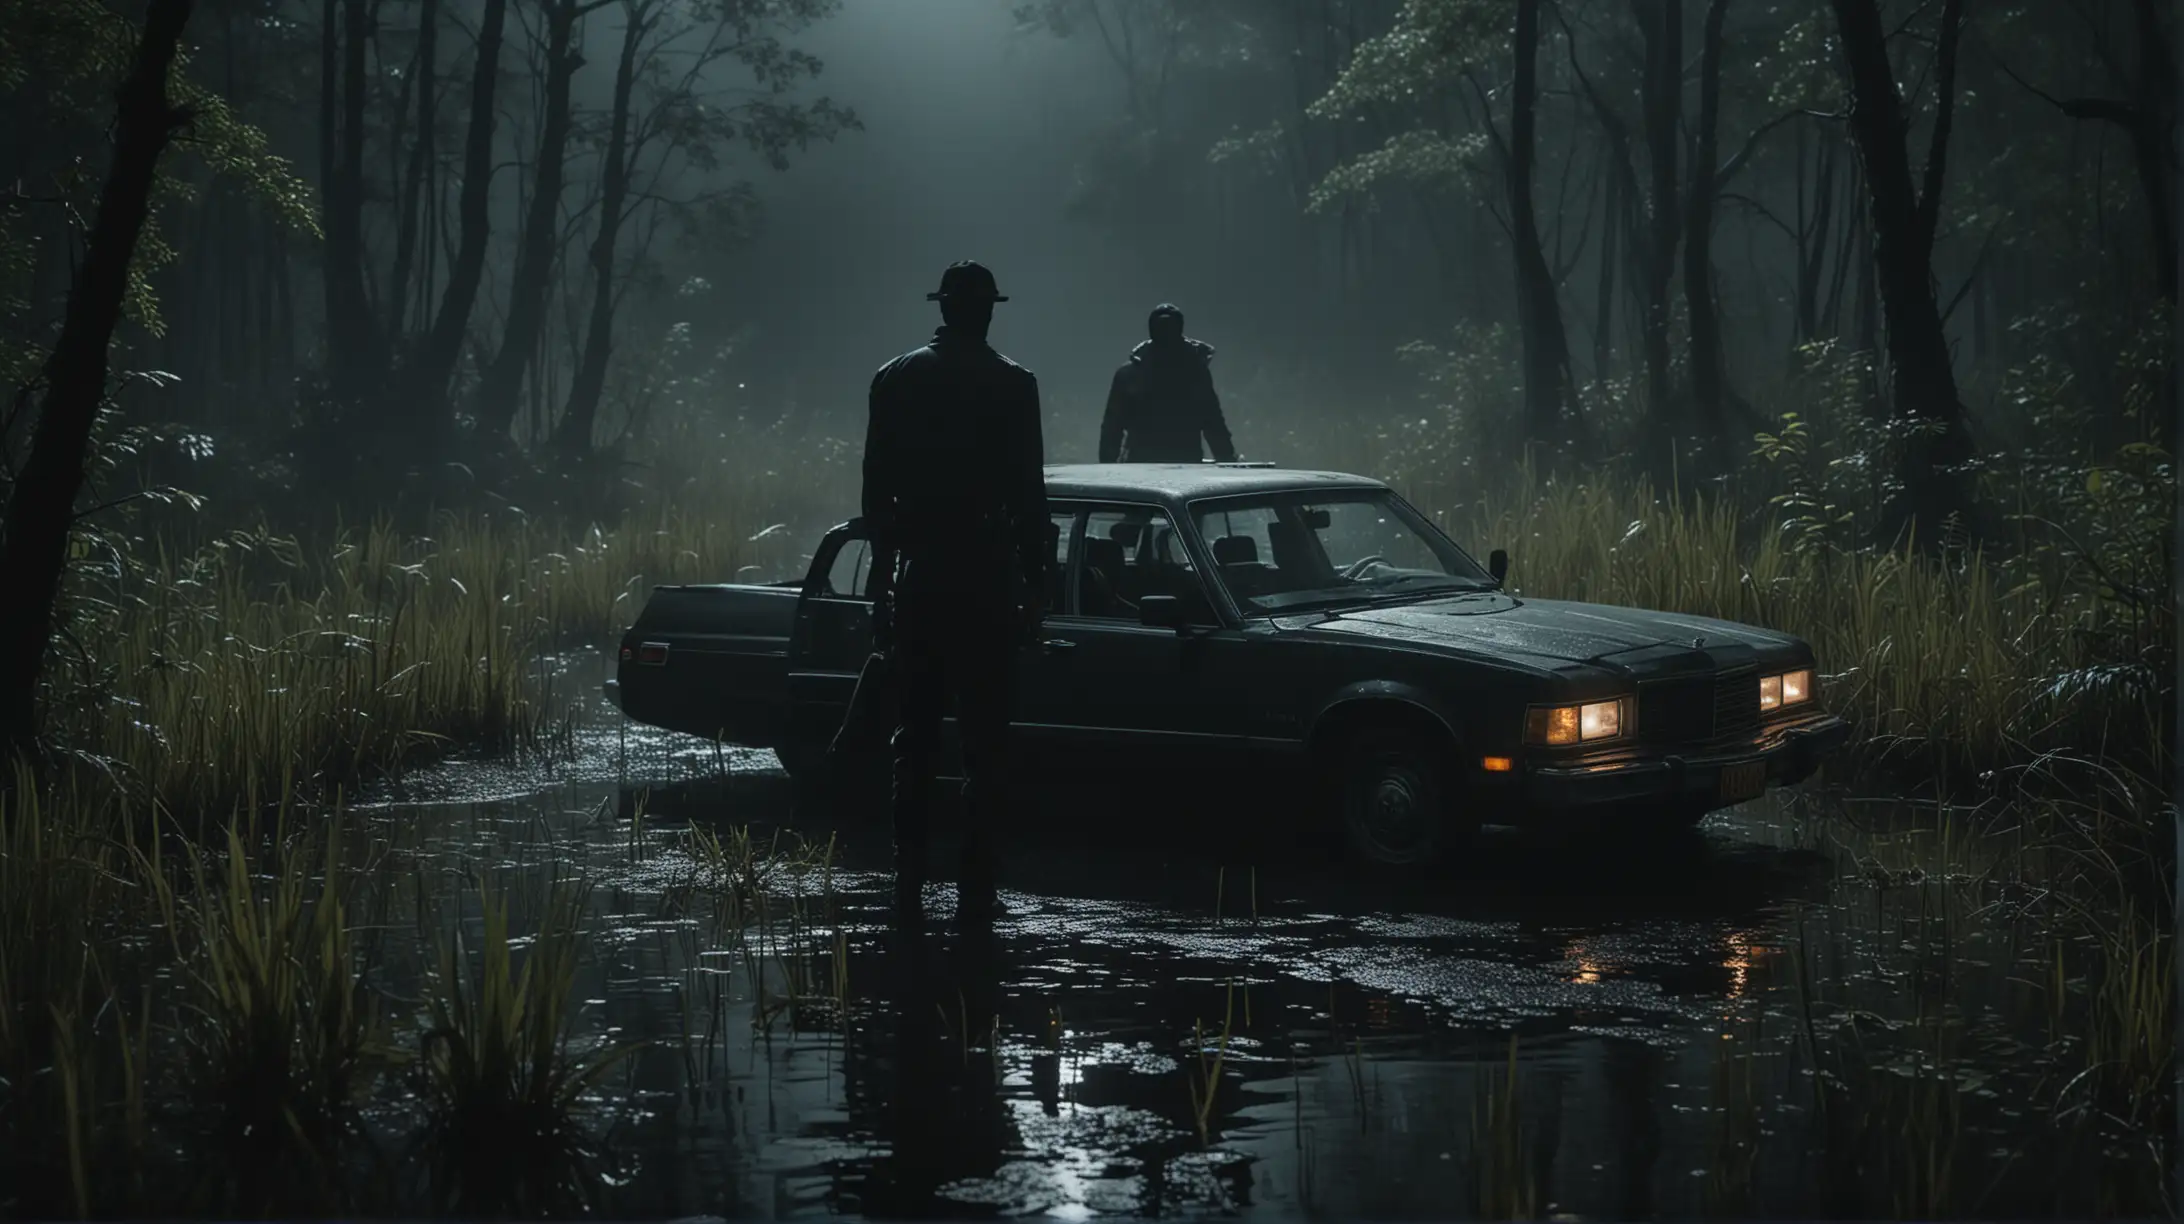 Generate a cinematic image of two black henchmen in a swampy area at night next to a 80s sedan with an open trunk.